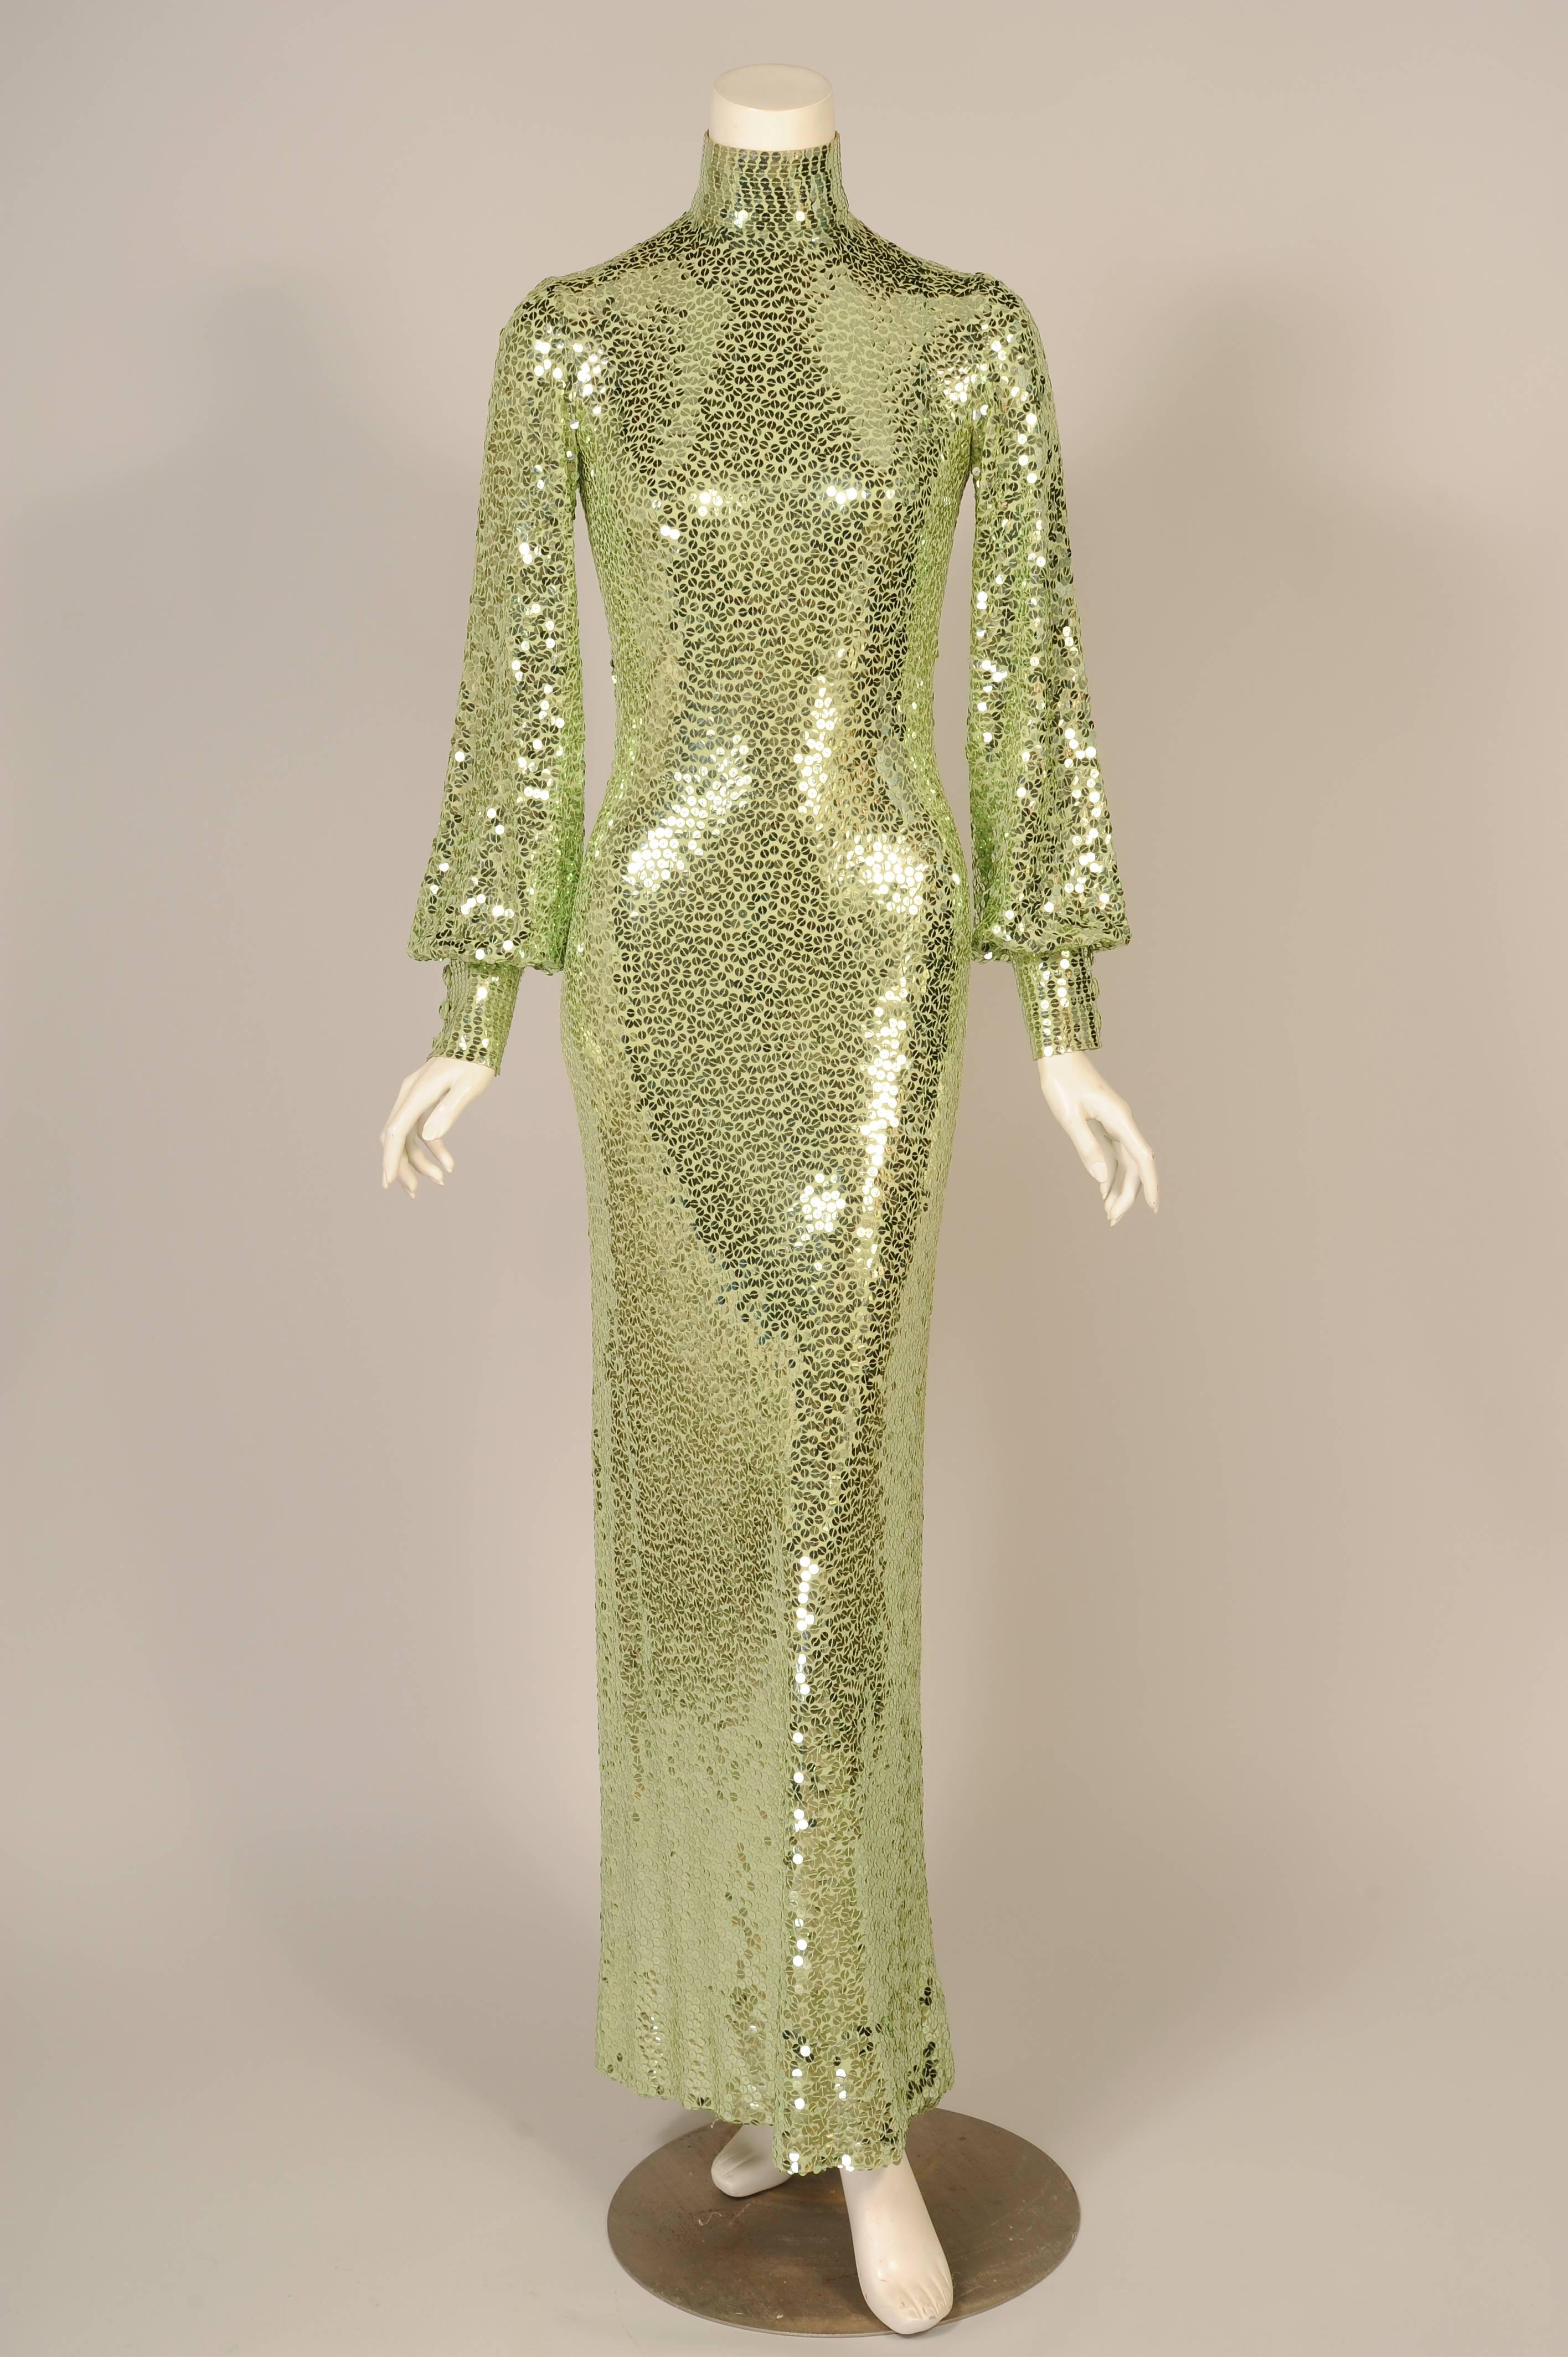 Norman Norell Iconic Mermaid Gown Sparkling Green Sequins on Silk 1960s-1970s  1